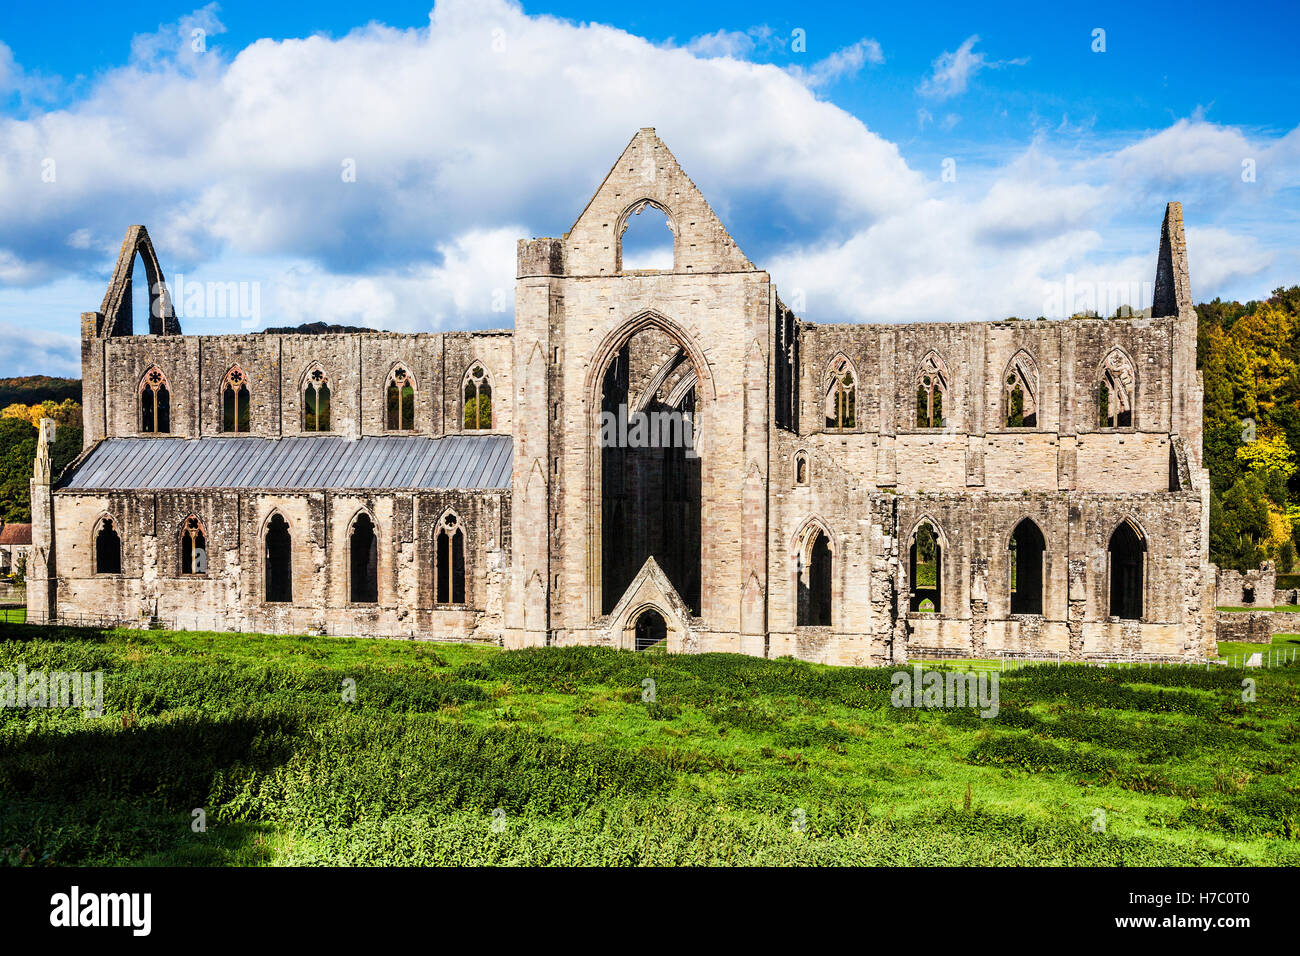 Tintern Abbey in Monmouthshire, Wales. Stockfoto